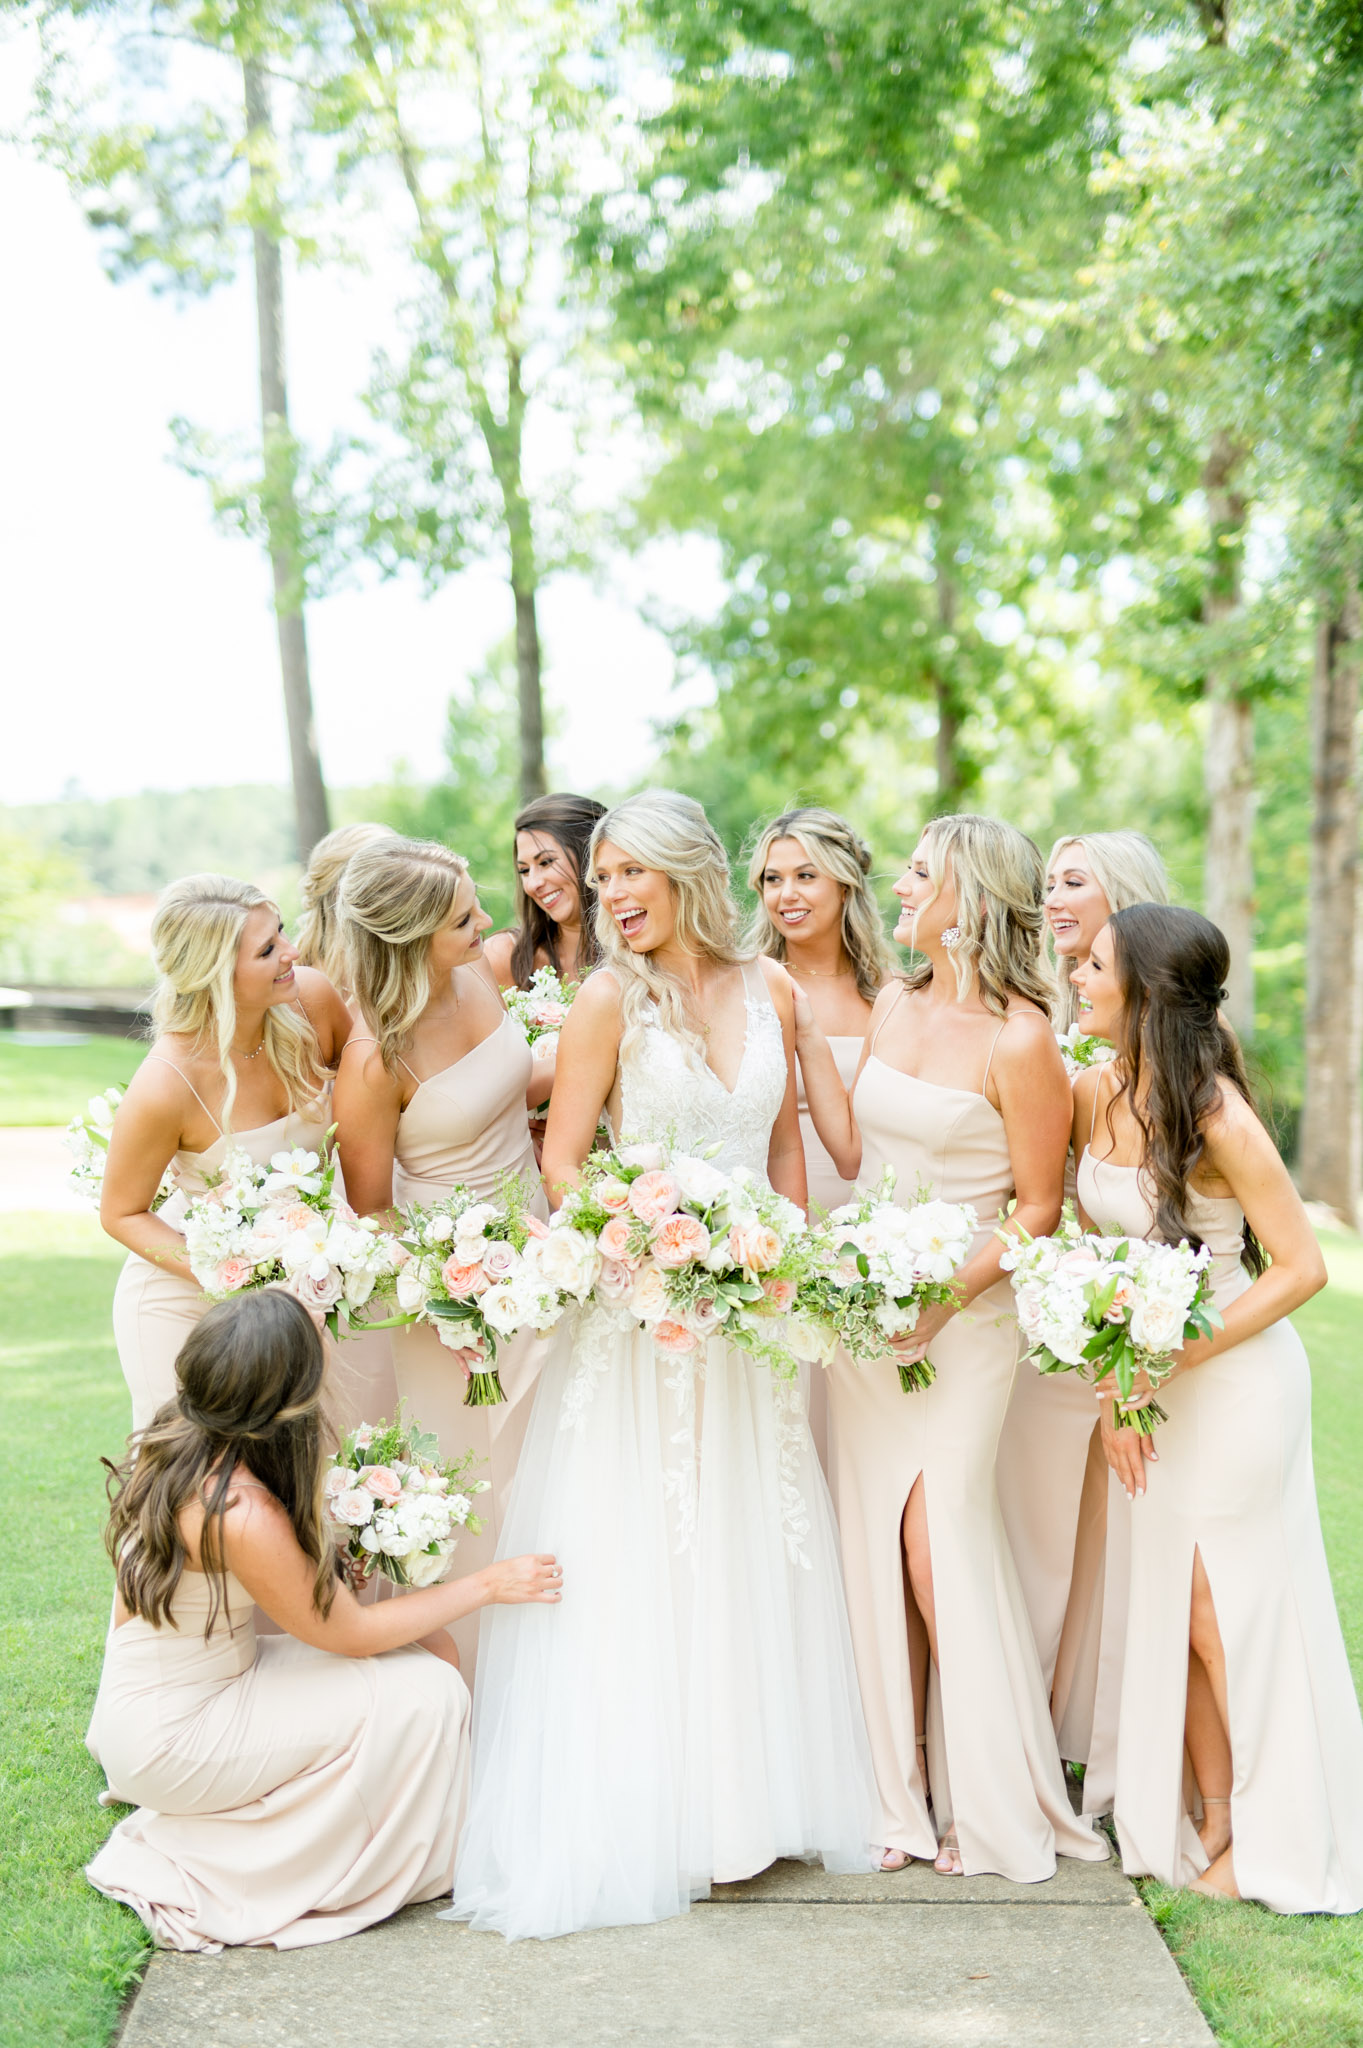 Bride laughs while bridesmaids help her get ready.